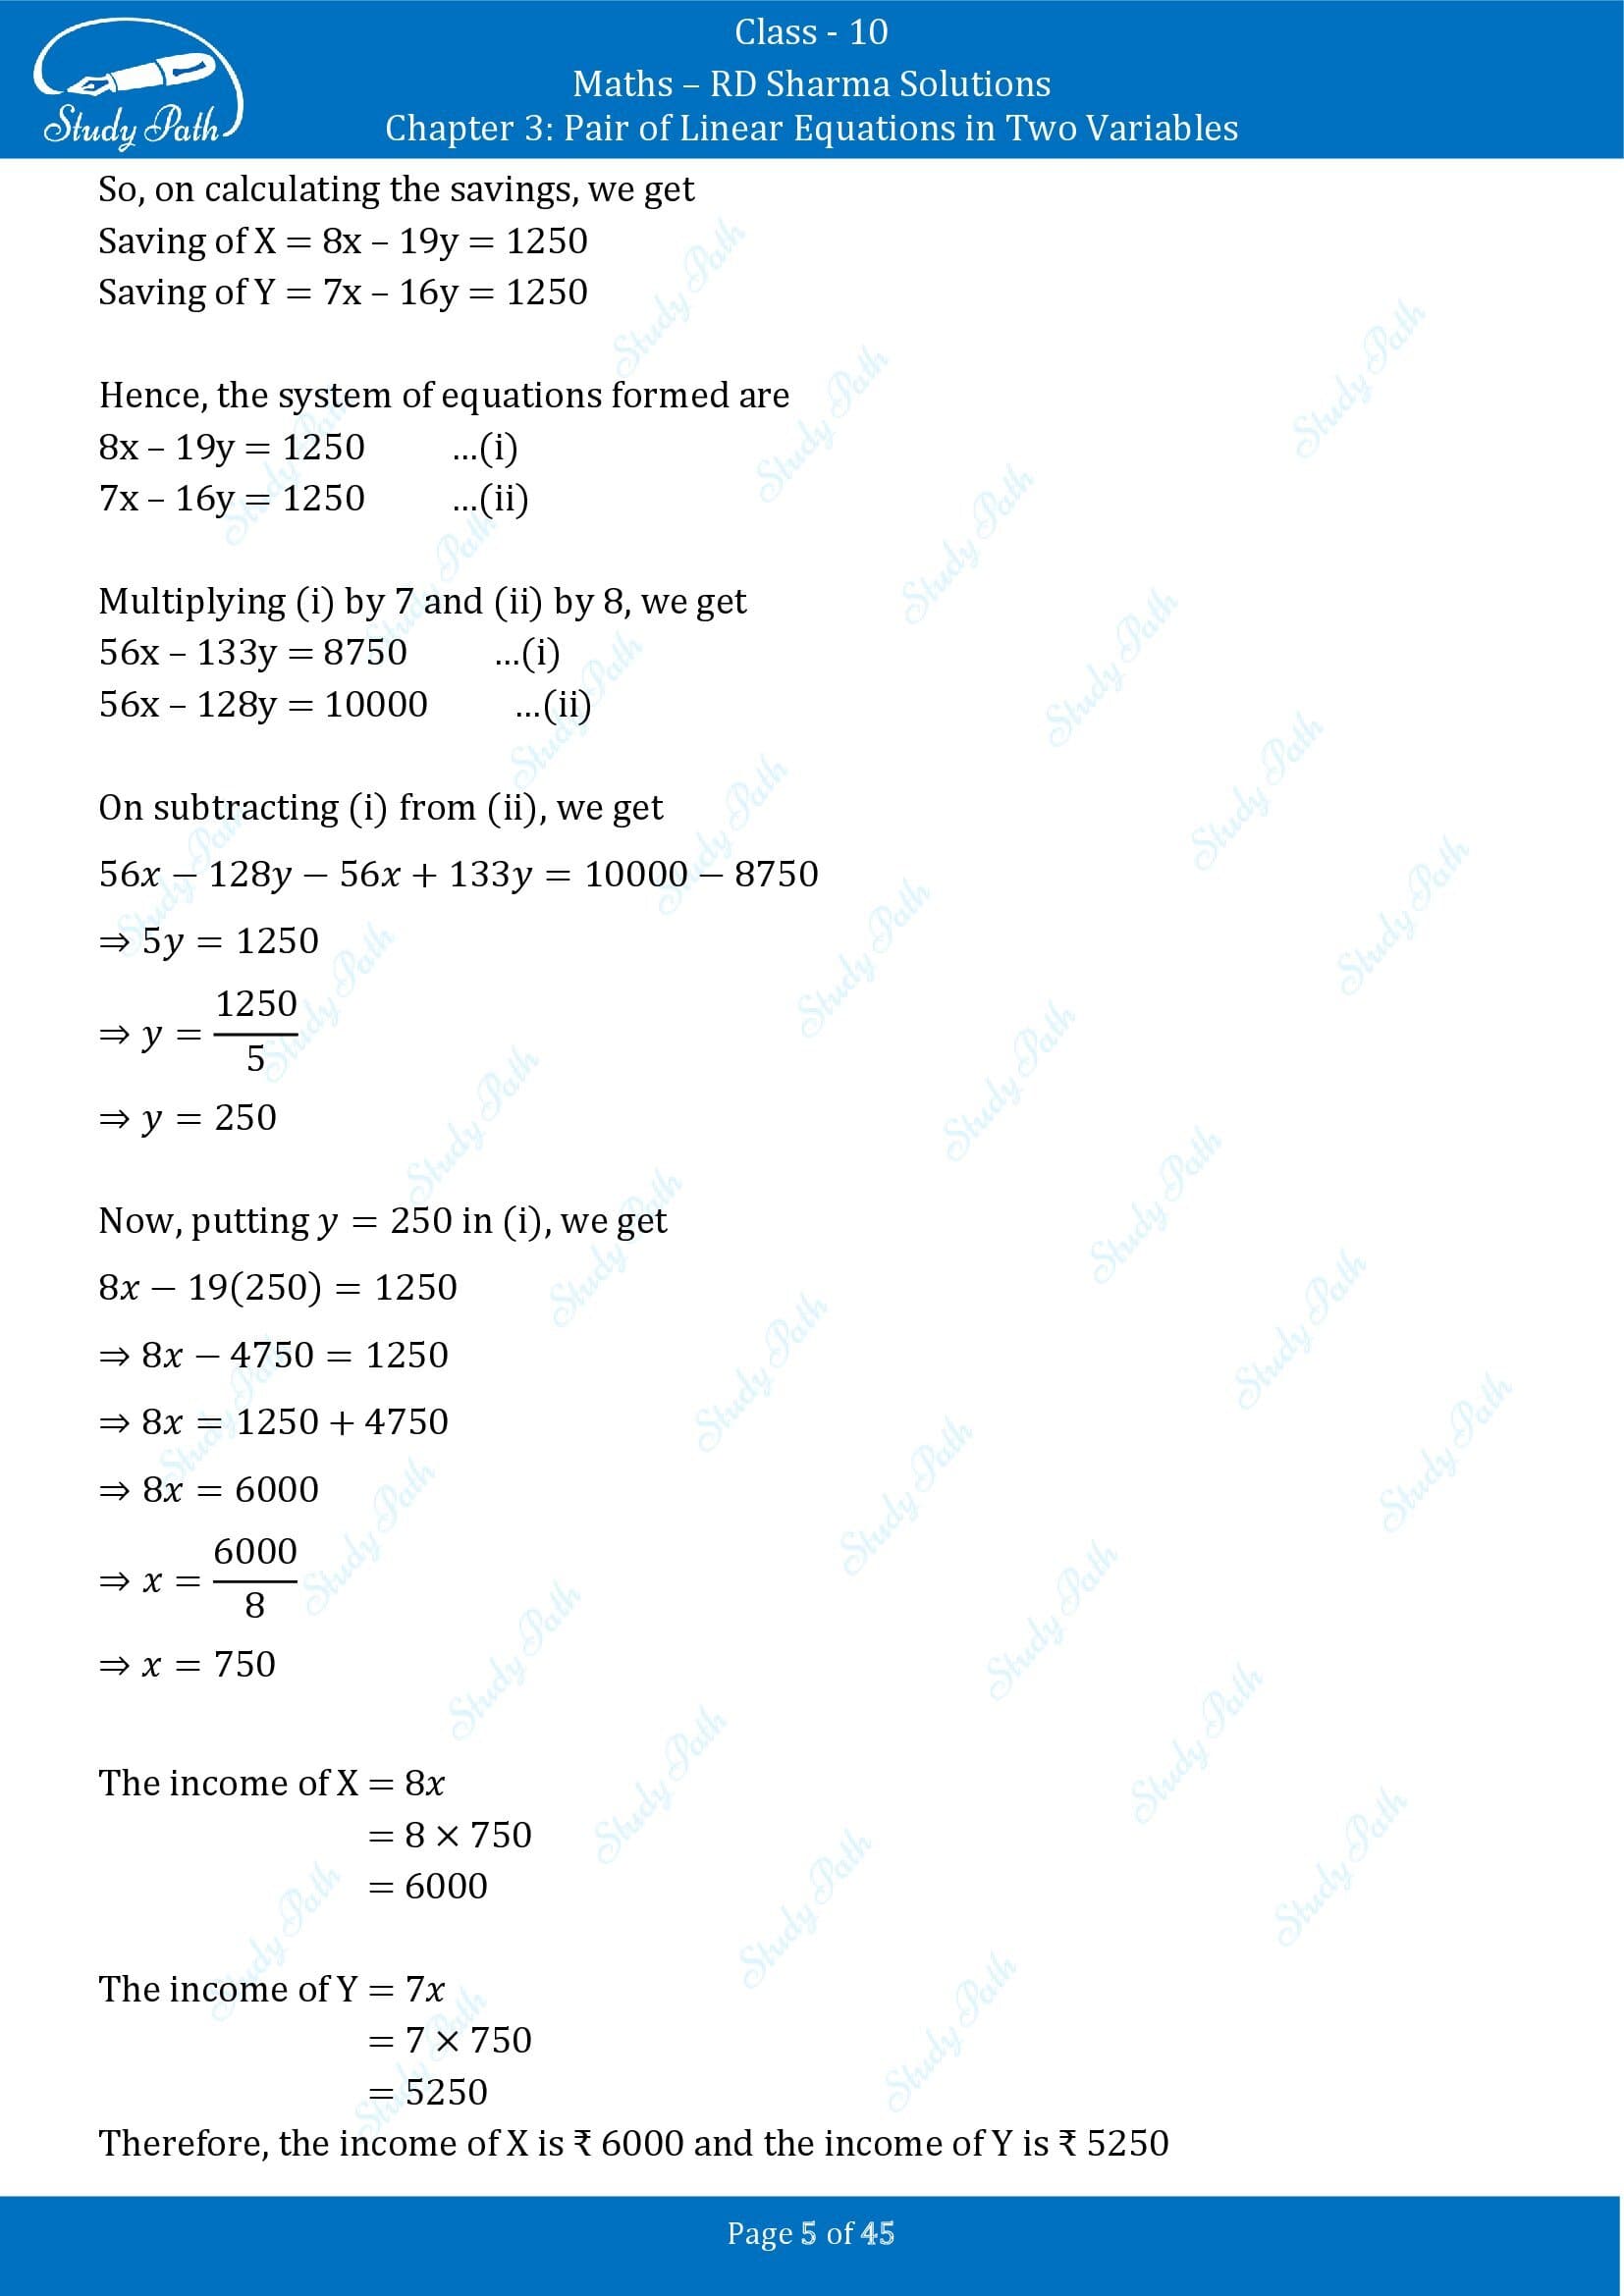 RD Sharma Solutions Class 10 Chapter 3 Pair of Linear Equations in Two Variables Exercise 3.11 00005